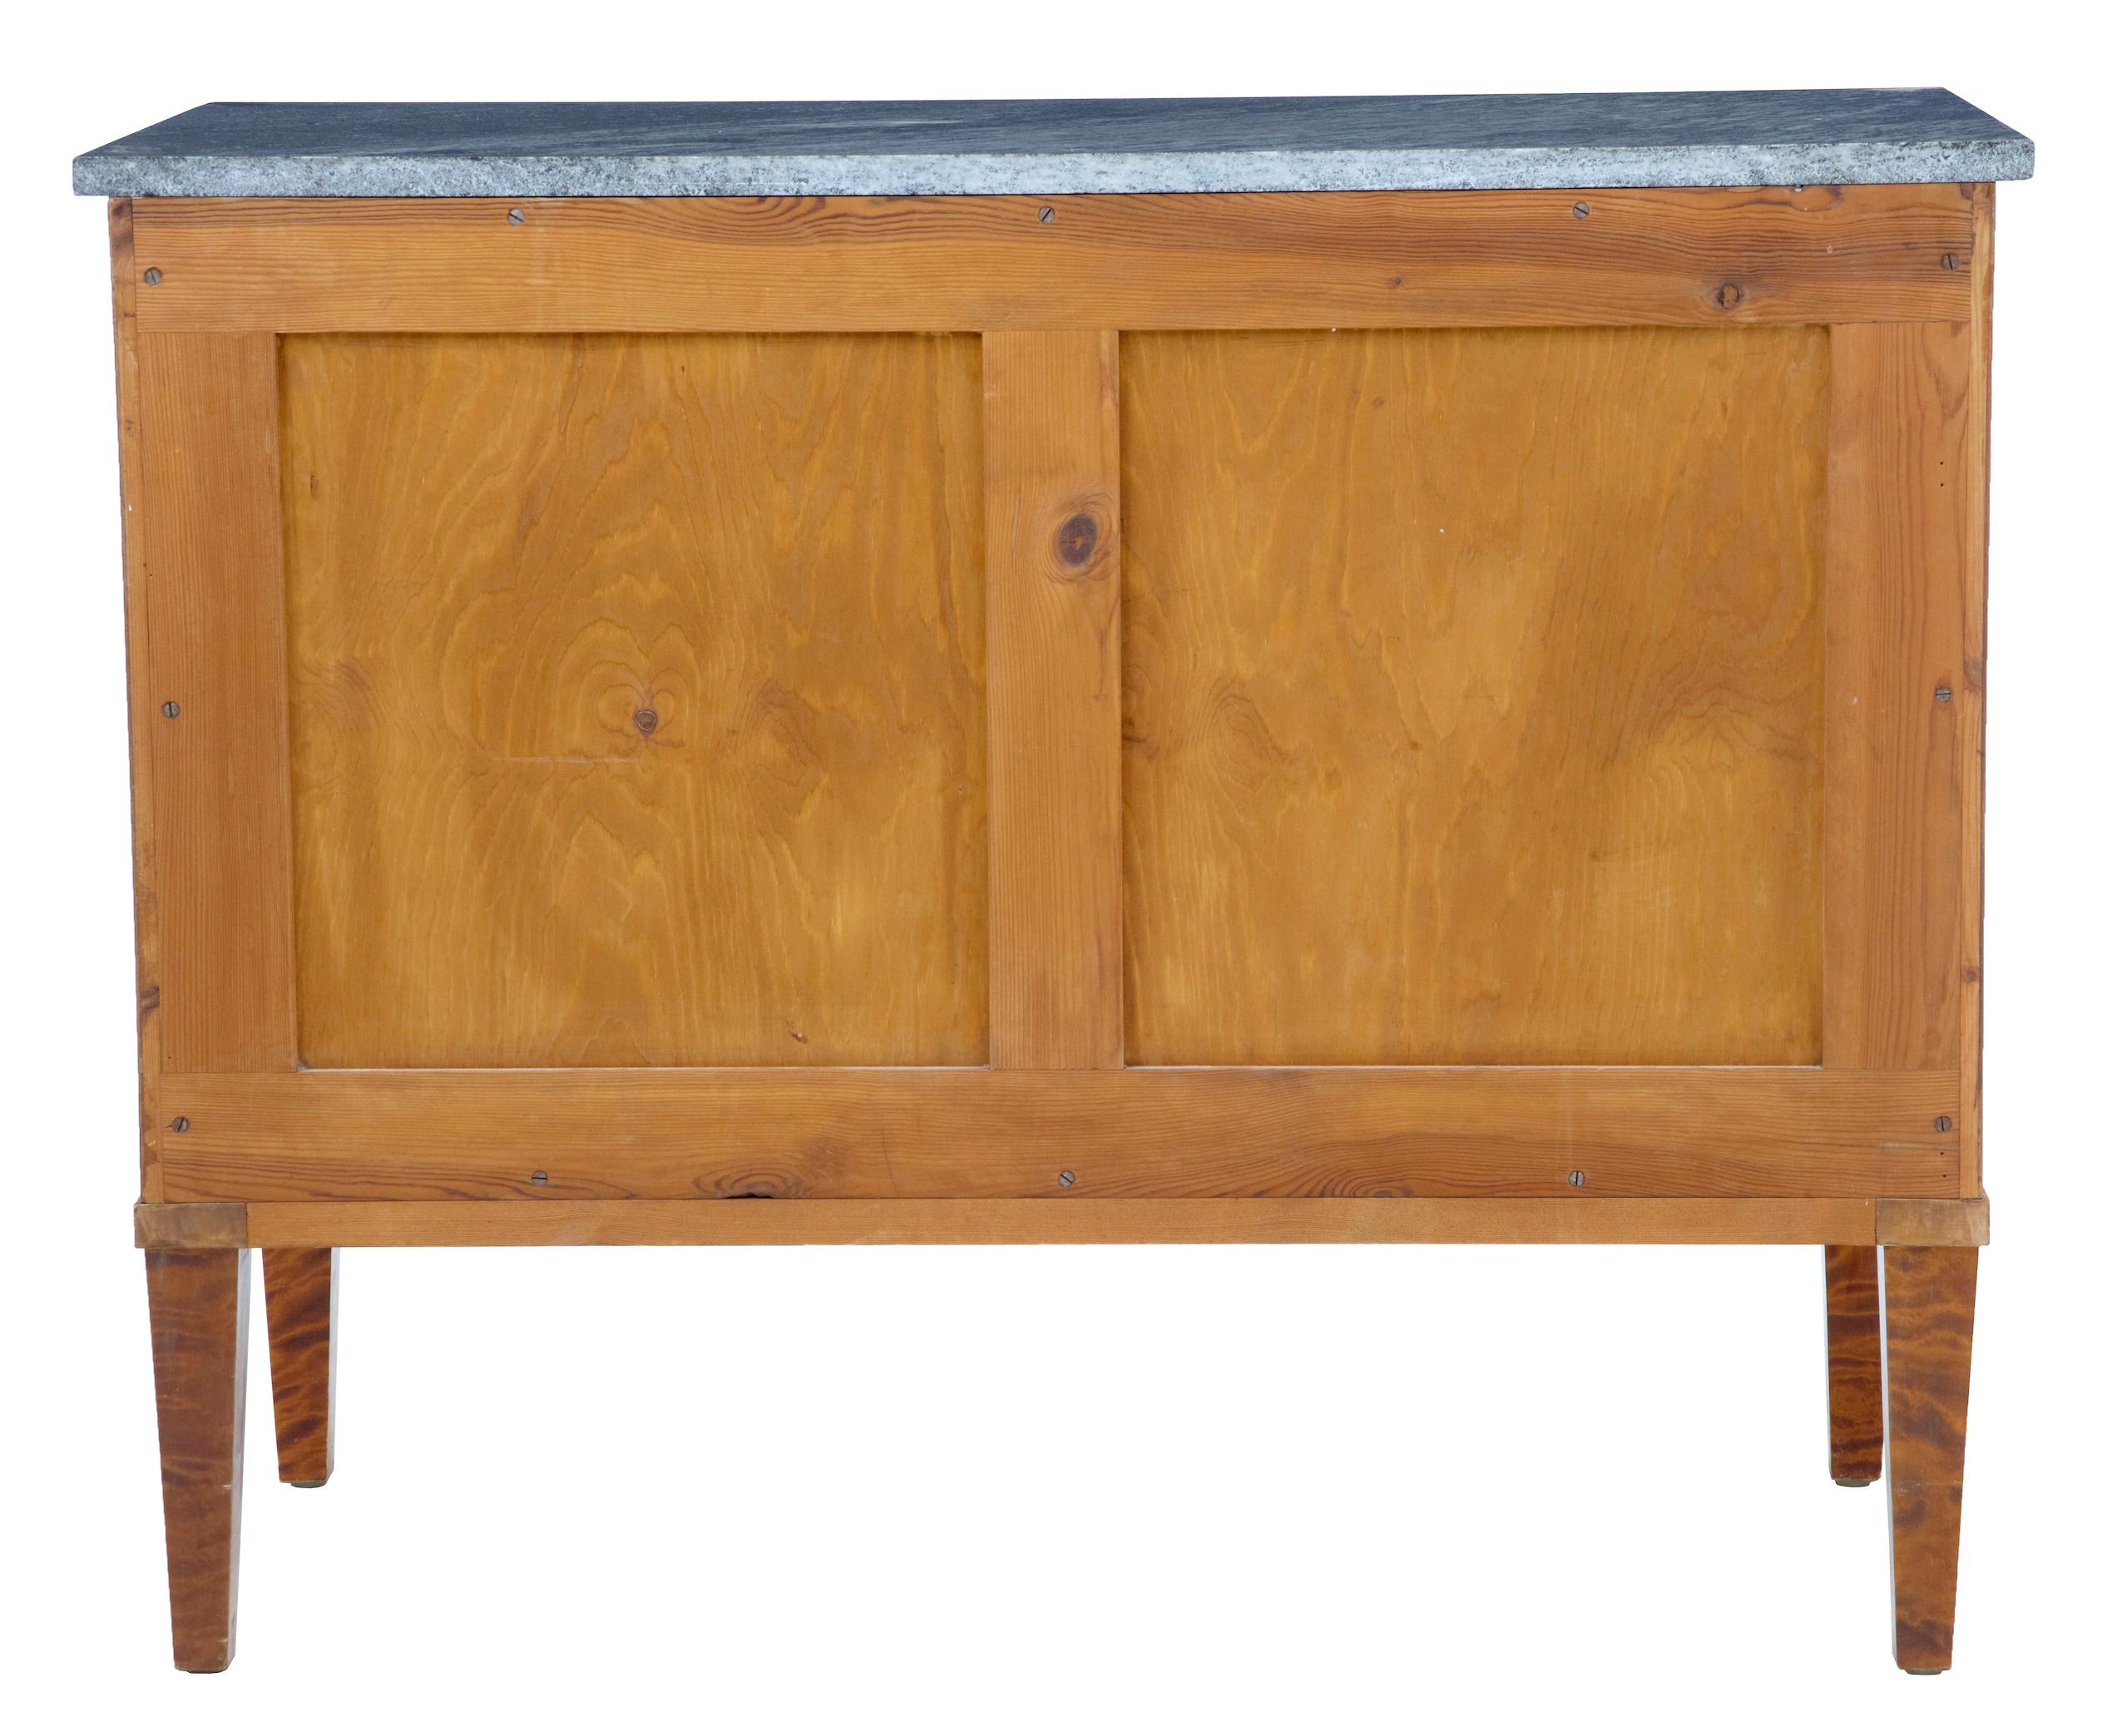 Swedish Mid-20th Century Golden Birch Marble-Top Chest of Drawers